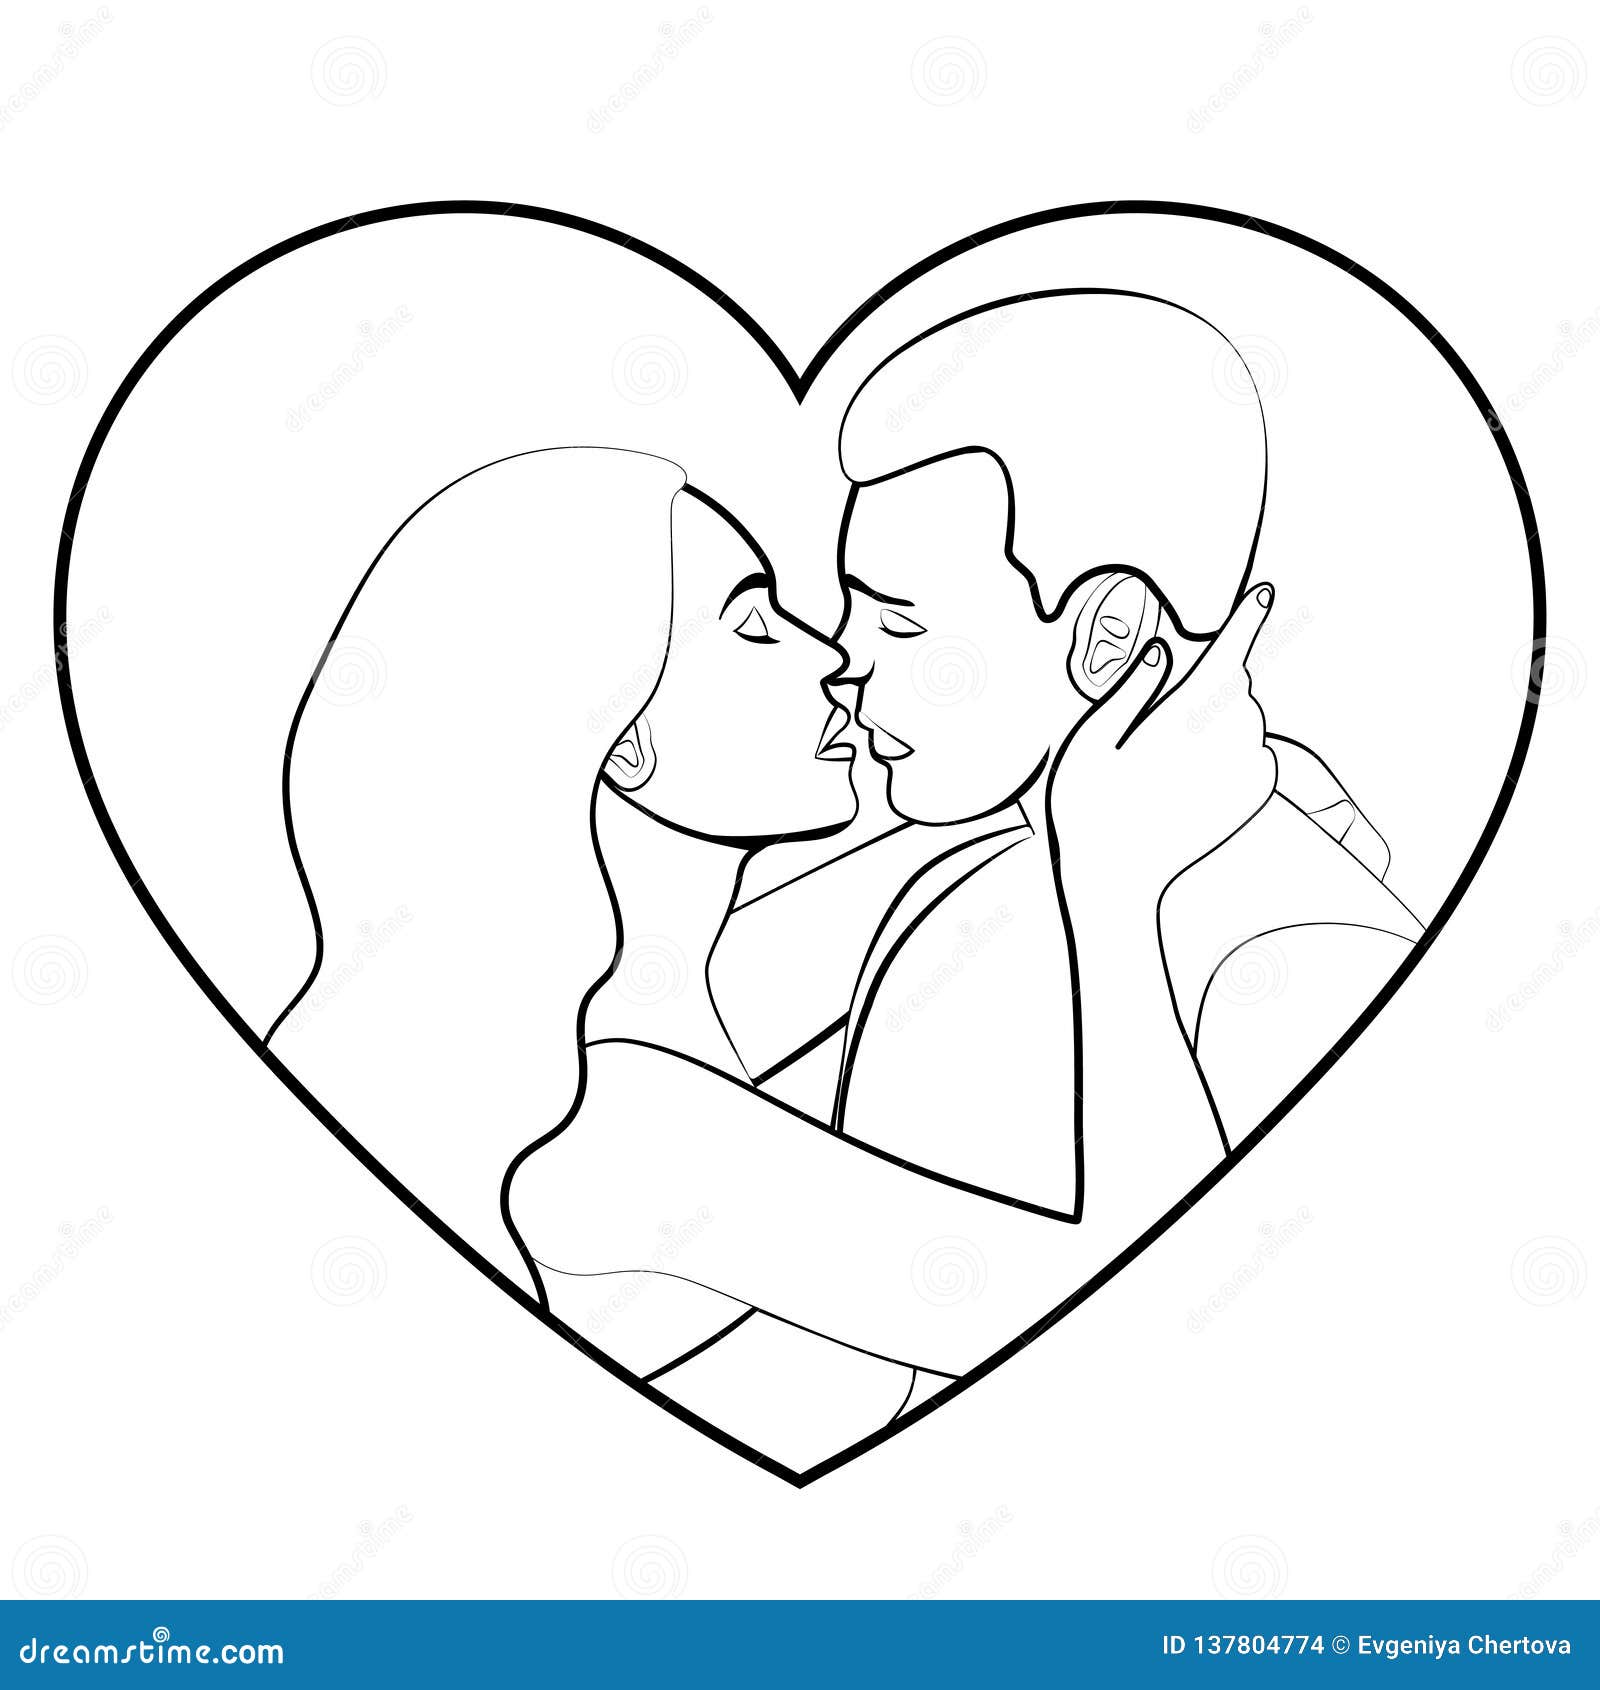 Loving Silhouette Drawing Couple, Hd Png Download - Love Couple Png,  Transparent Png , Transparent Png Image - PNGitem